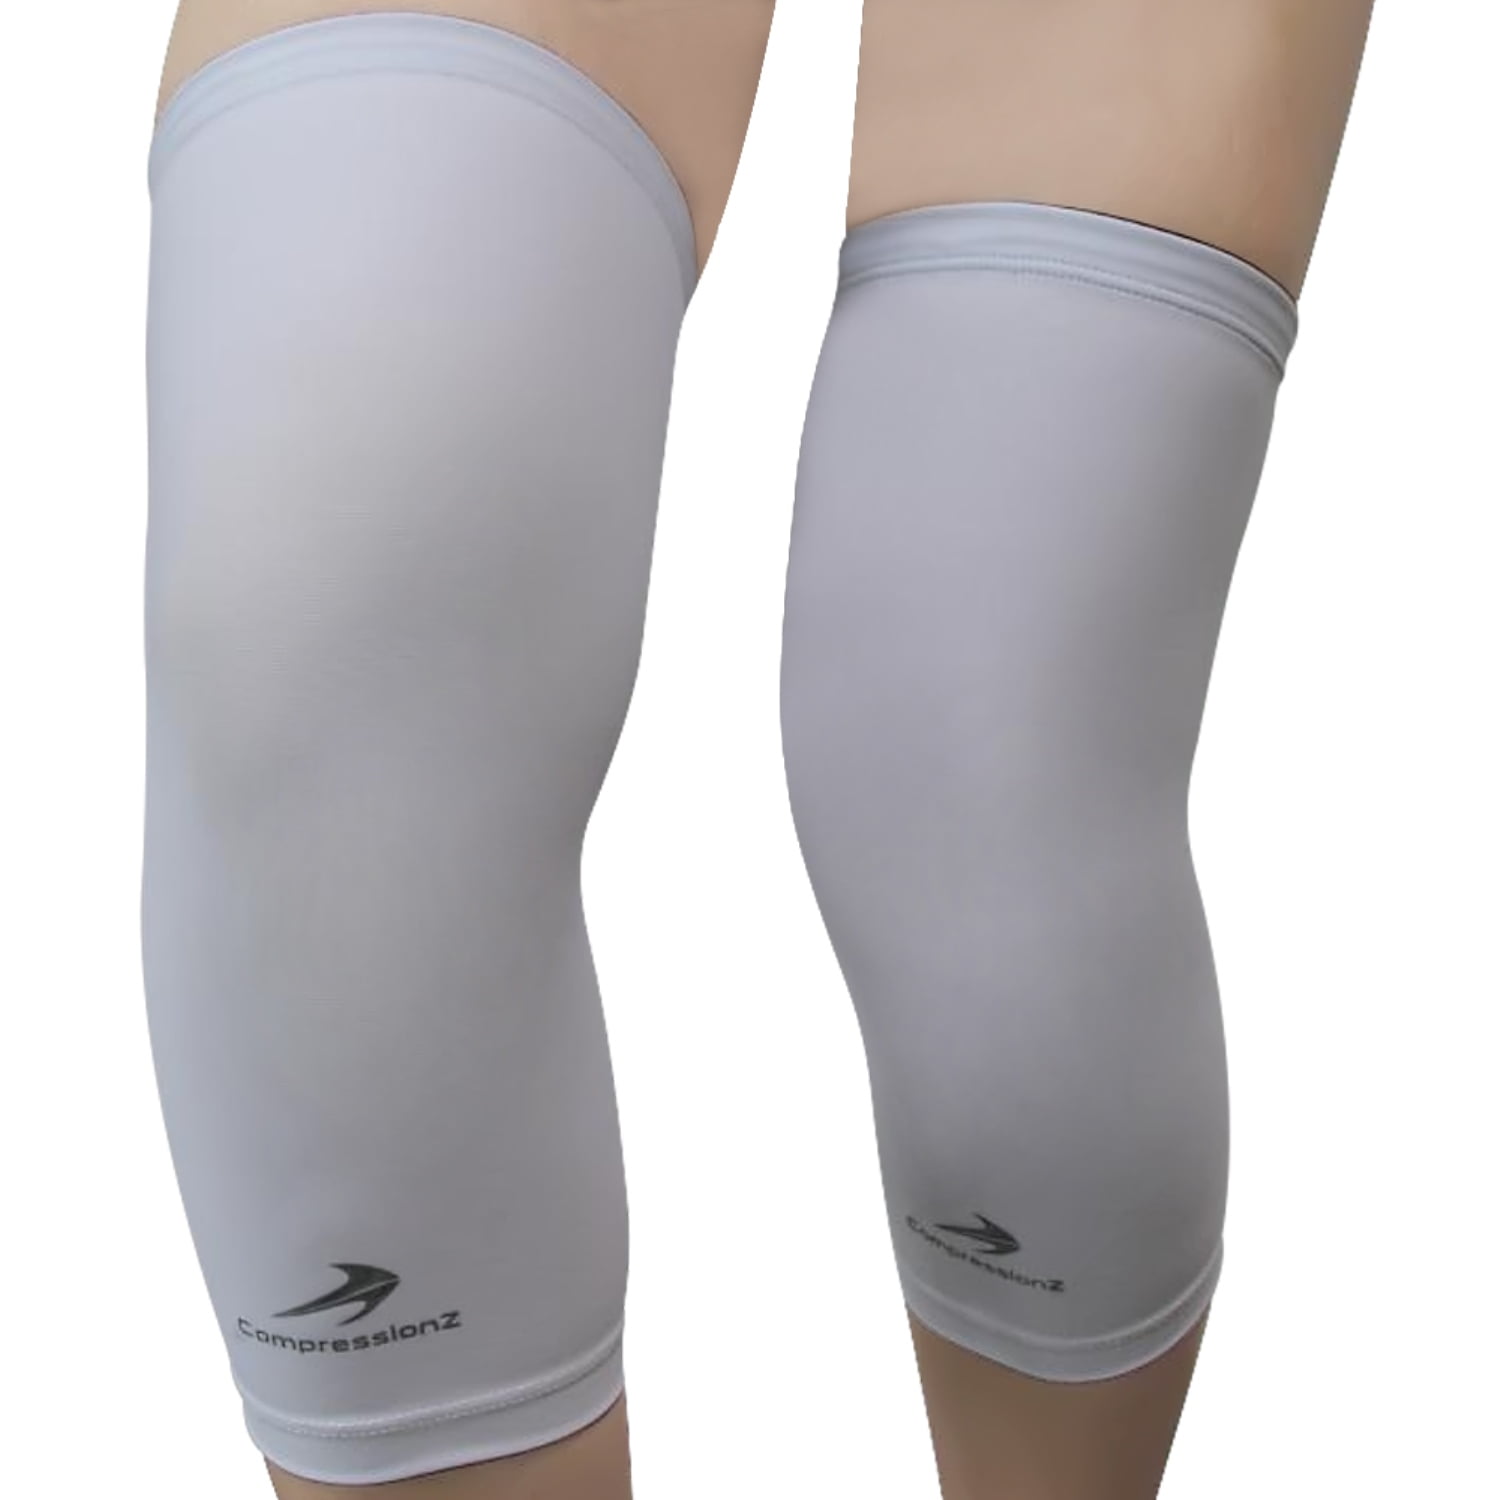 CompressionZ Compression Knee Sleeves (1 Pair) - Comfortable Fitting ...